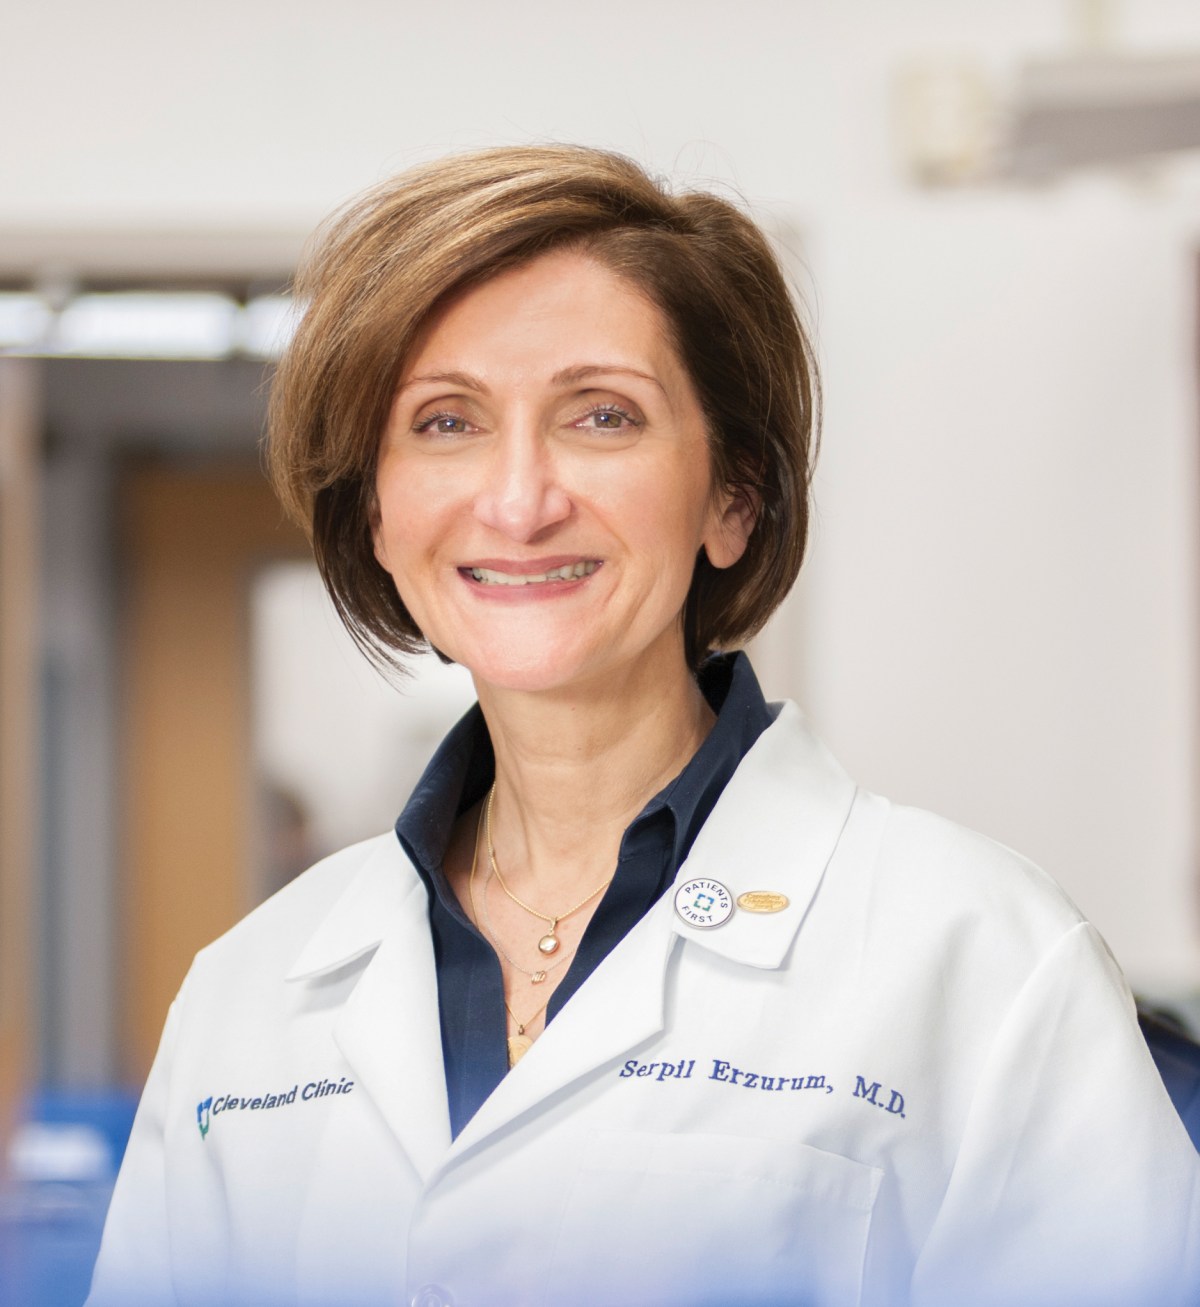 Exclusive interview with Prof. Serpil Erzurum, MD, Cleveland Clinic’s Chief Research and Academic Officer, for the Turkish pulmonary Hypertension Association (PAHSSc)